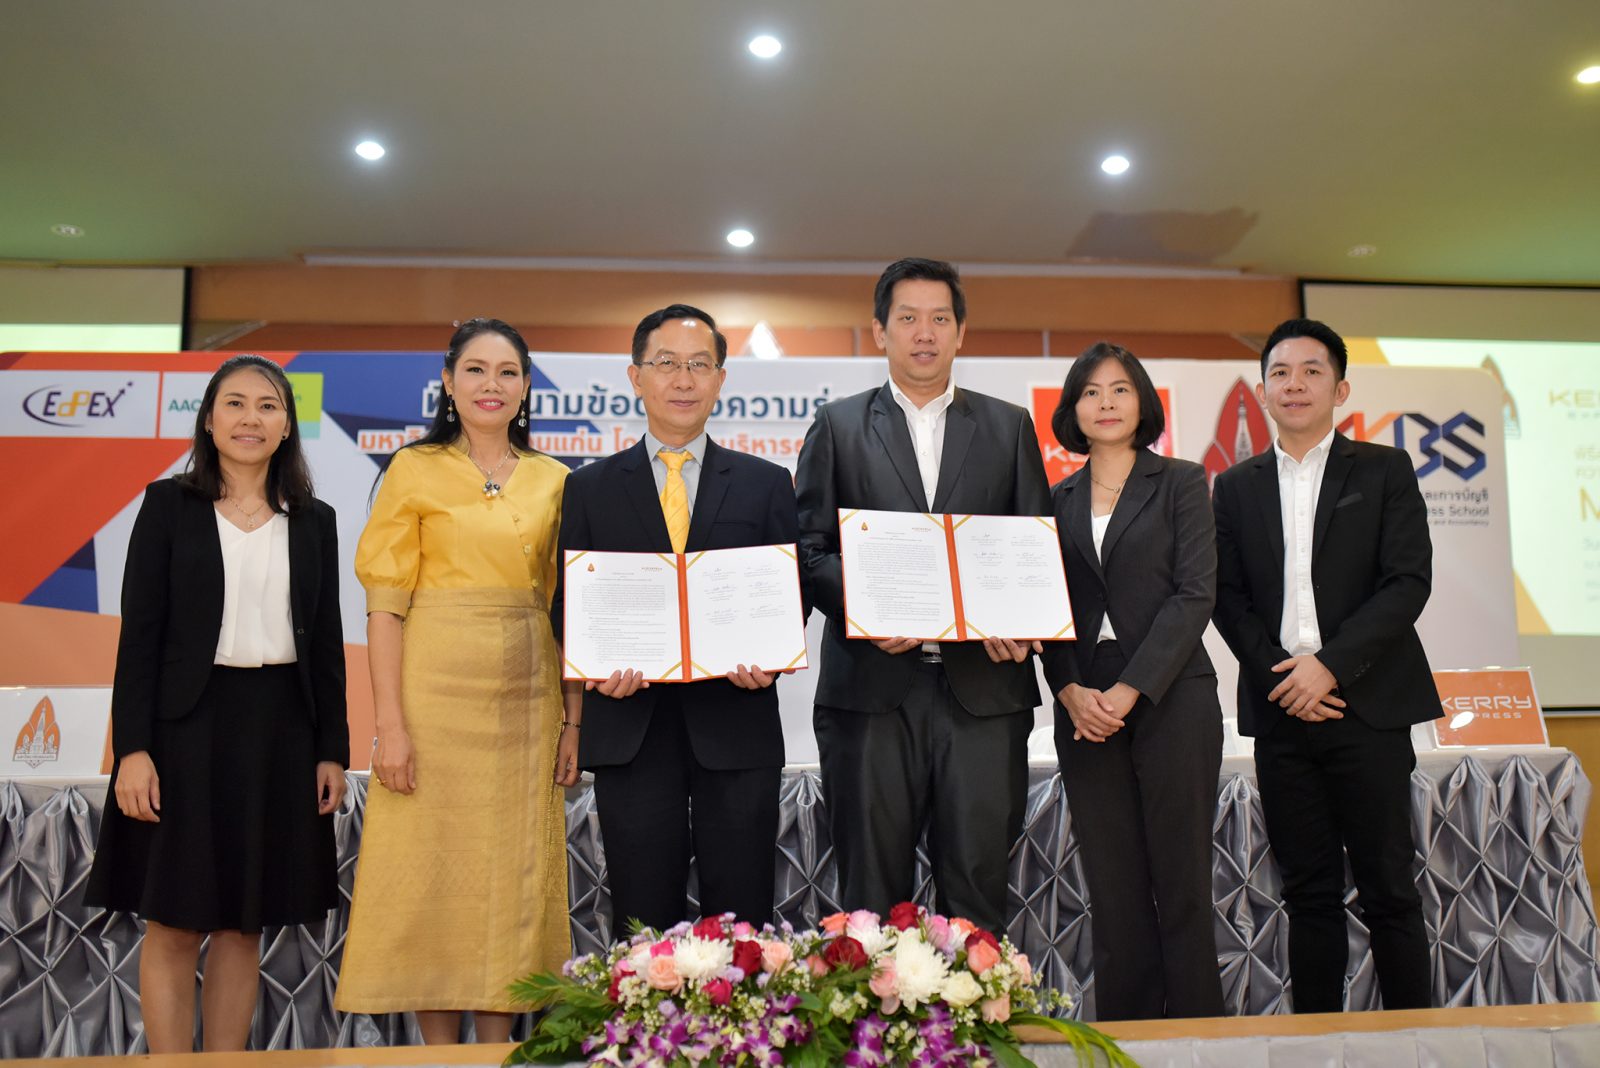 KKBS signs MOU with Kerry Express to improve students’ academic potential for research